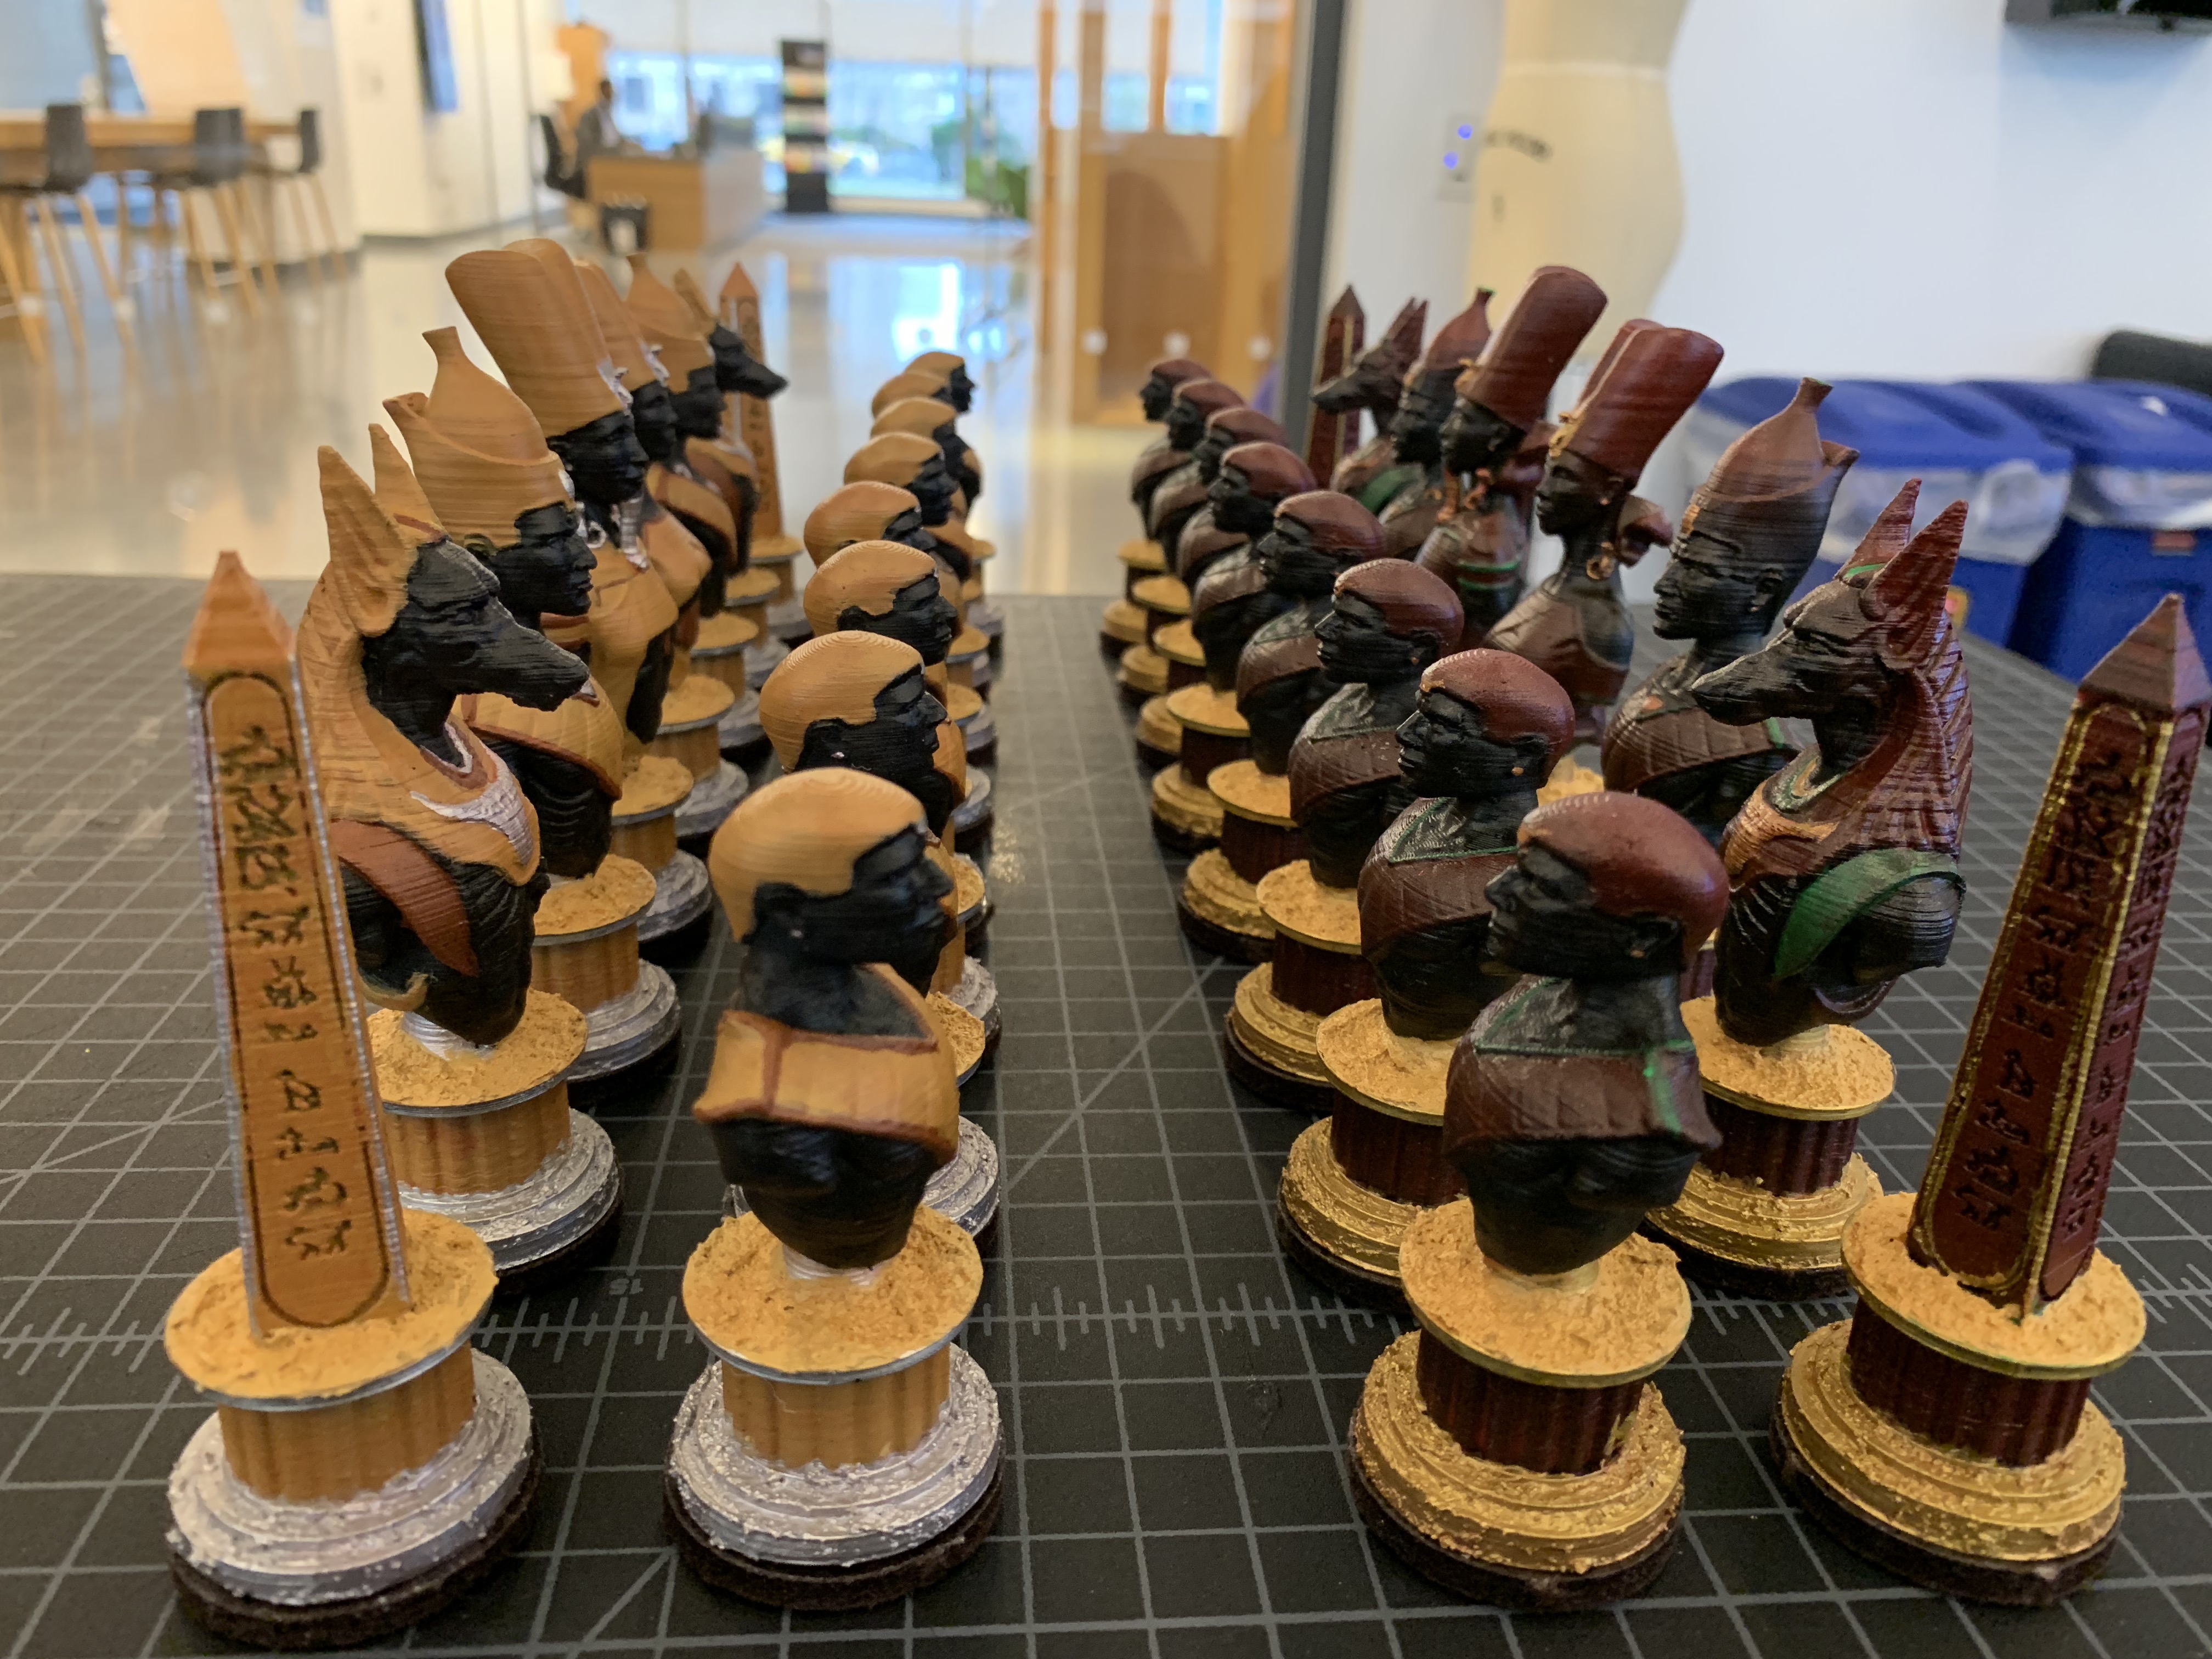 The completed chess pieces are arranged in four rows. The opposing sides face each other.